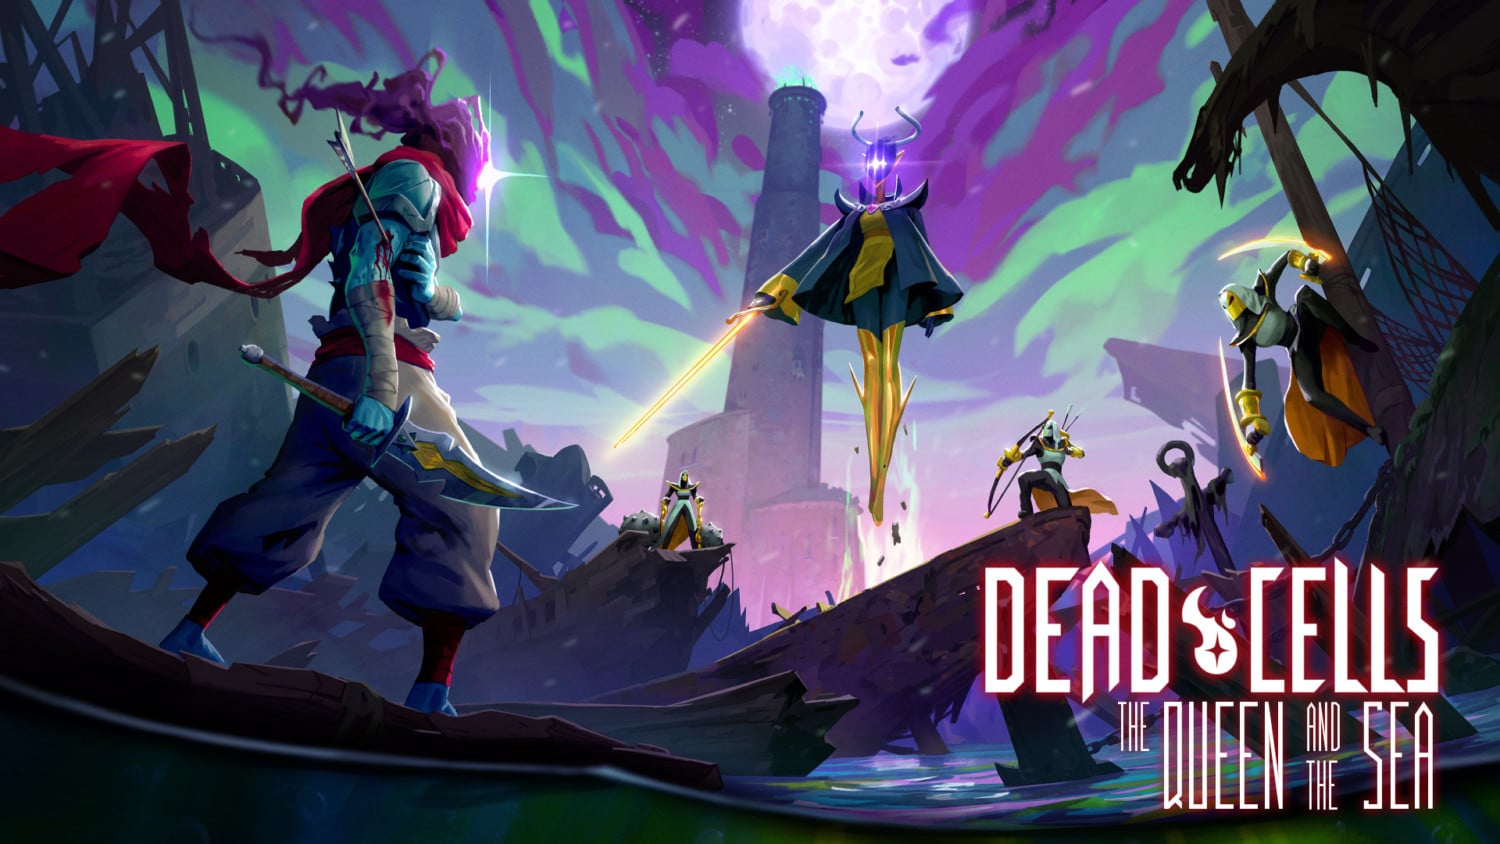 Dead Cells: The Queen & The Sea DLC is coming 2022